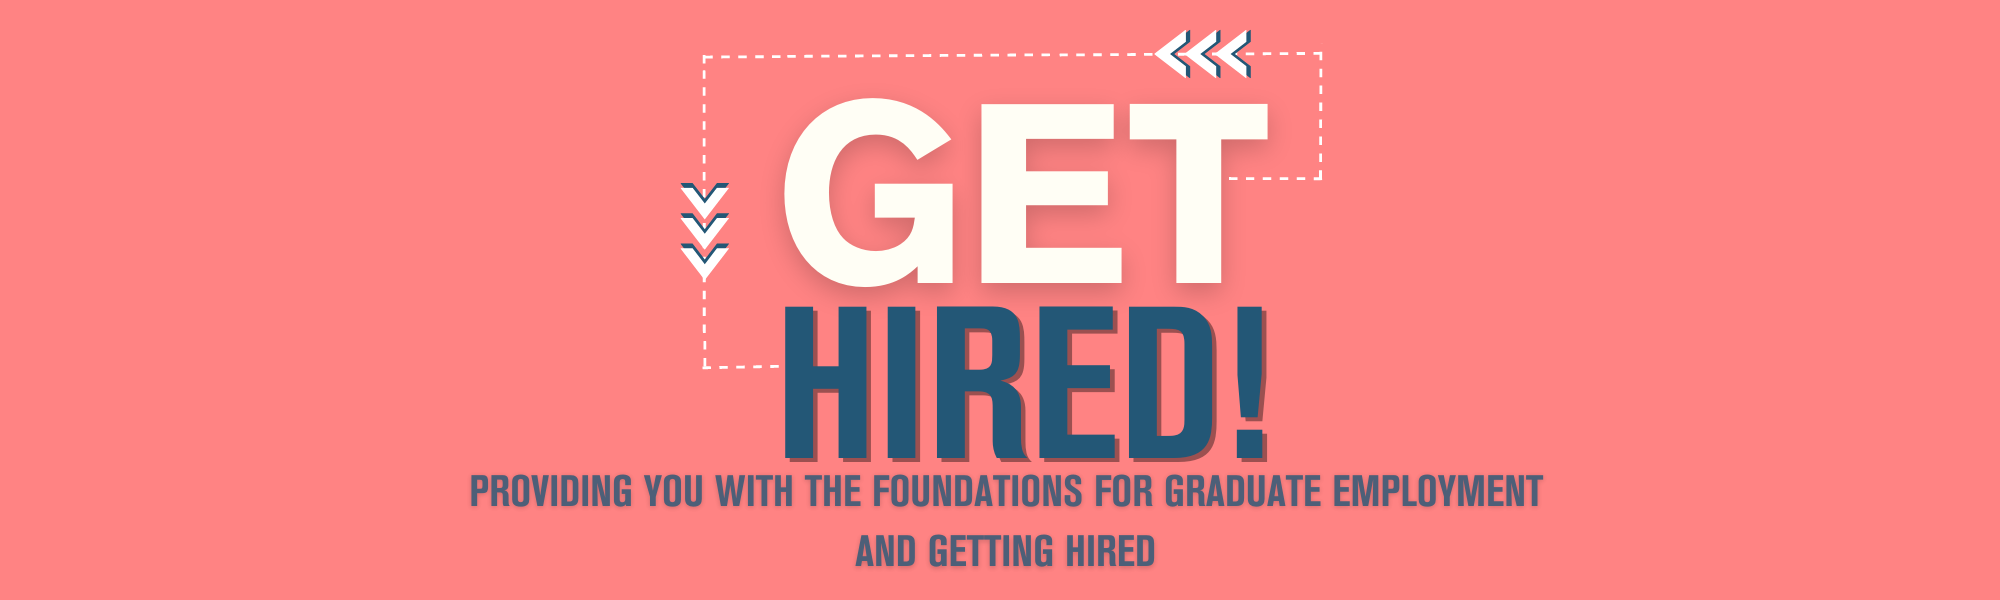 Get Hired - providing you with the foundations for graduate employment and getting hired.